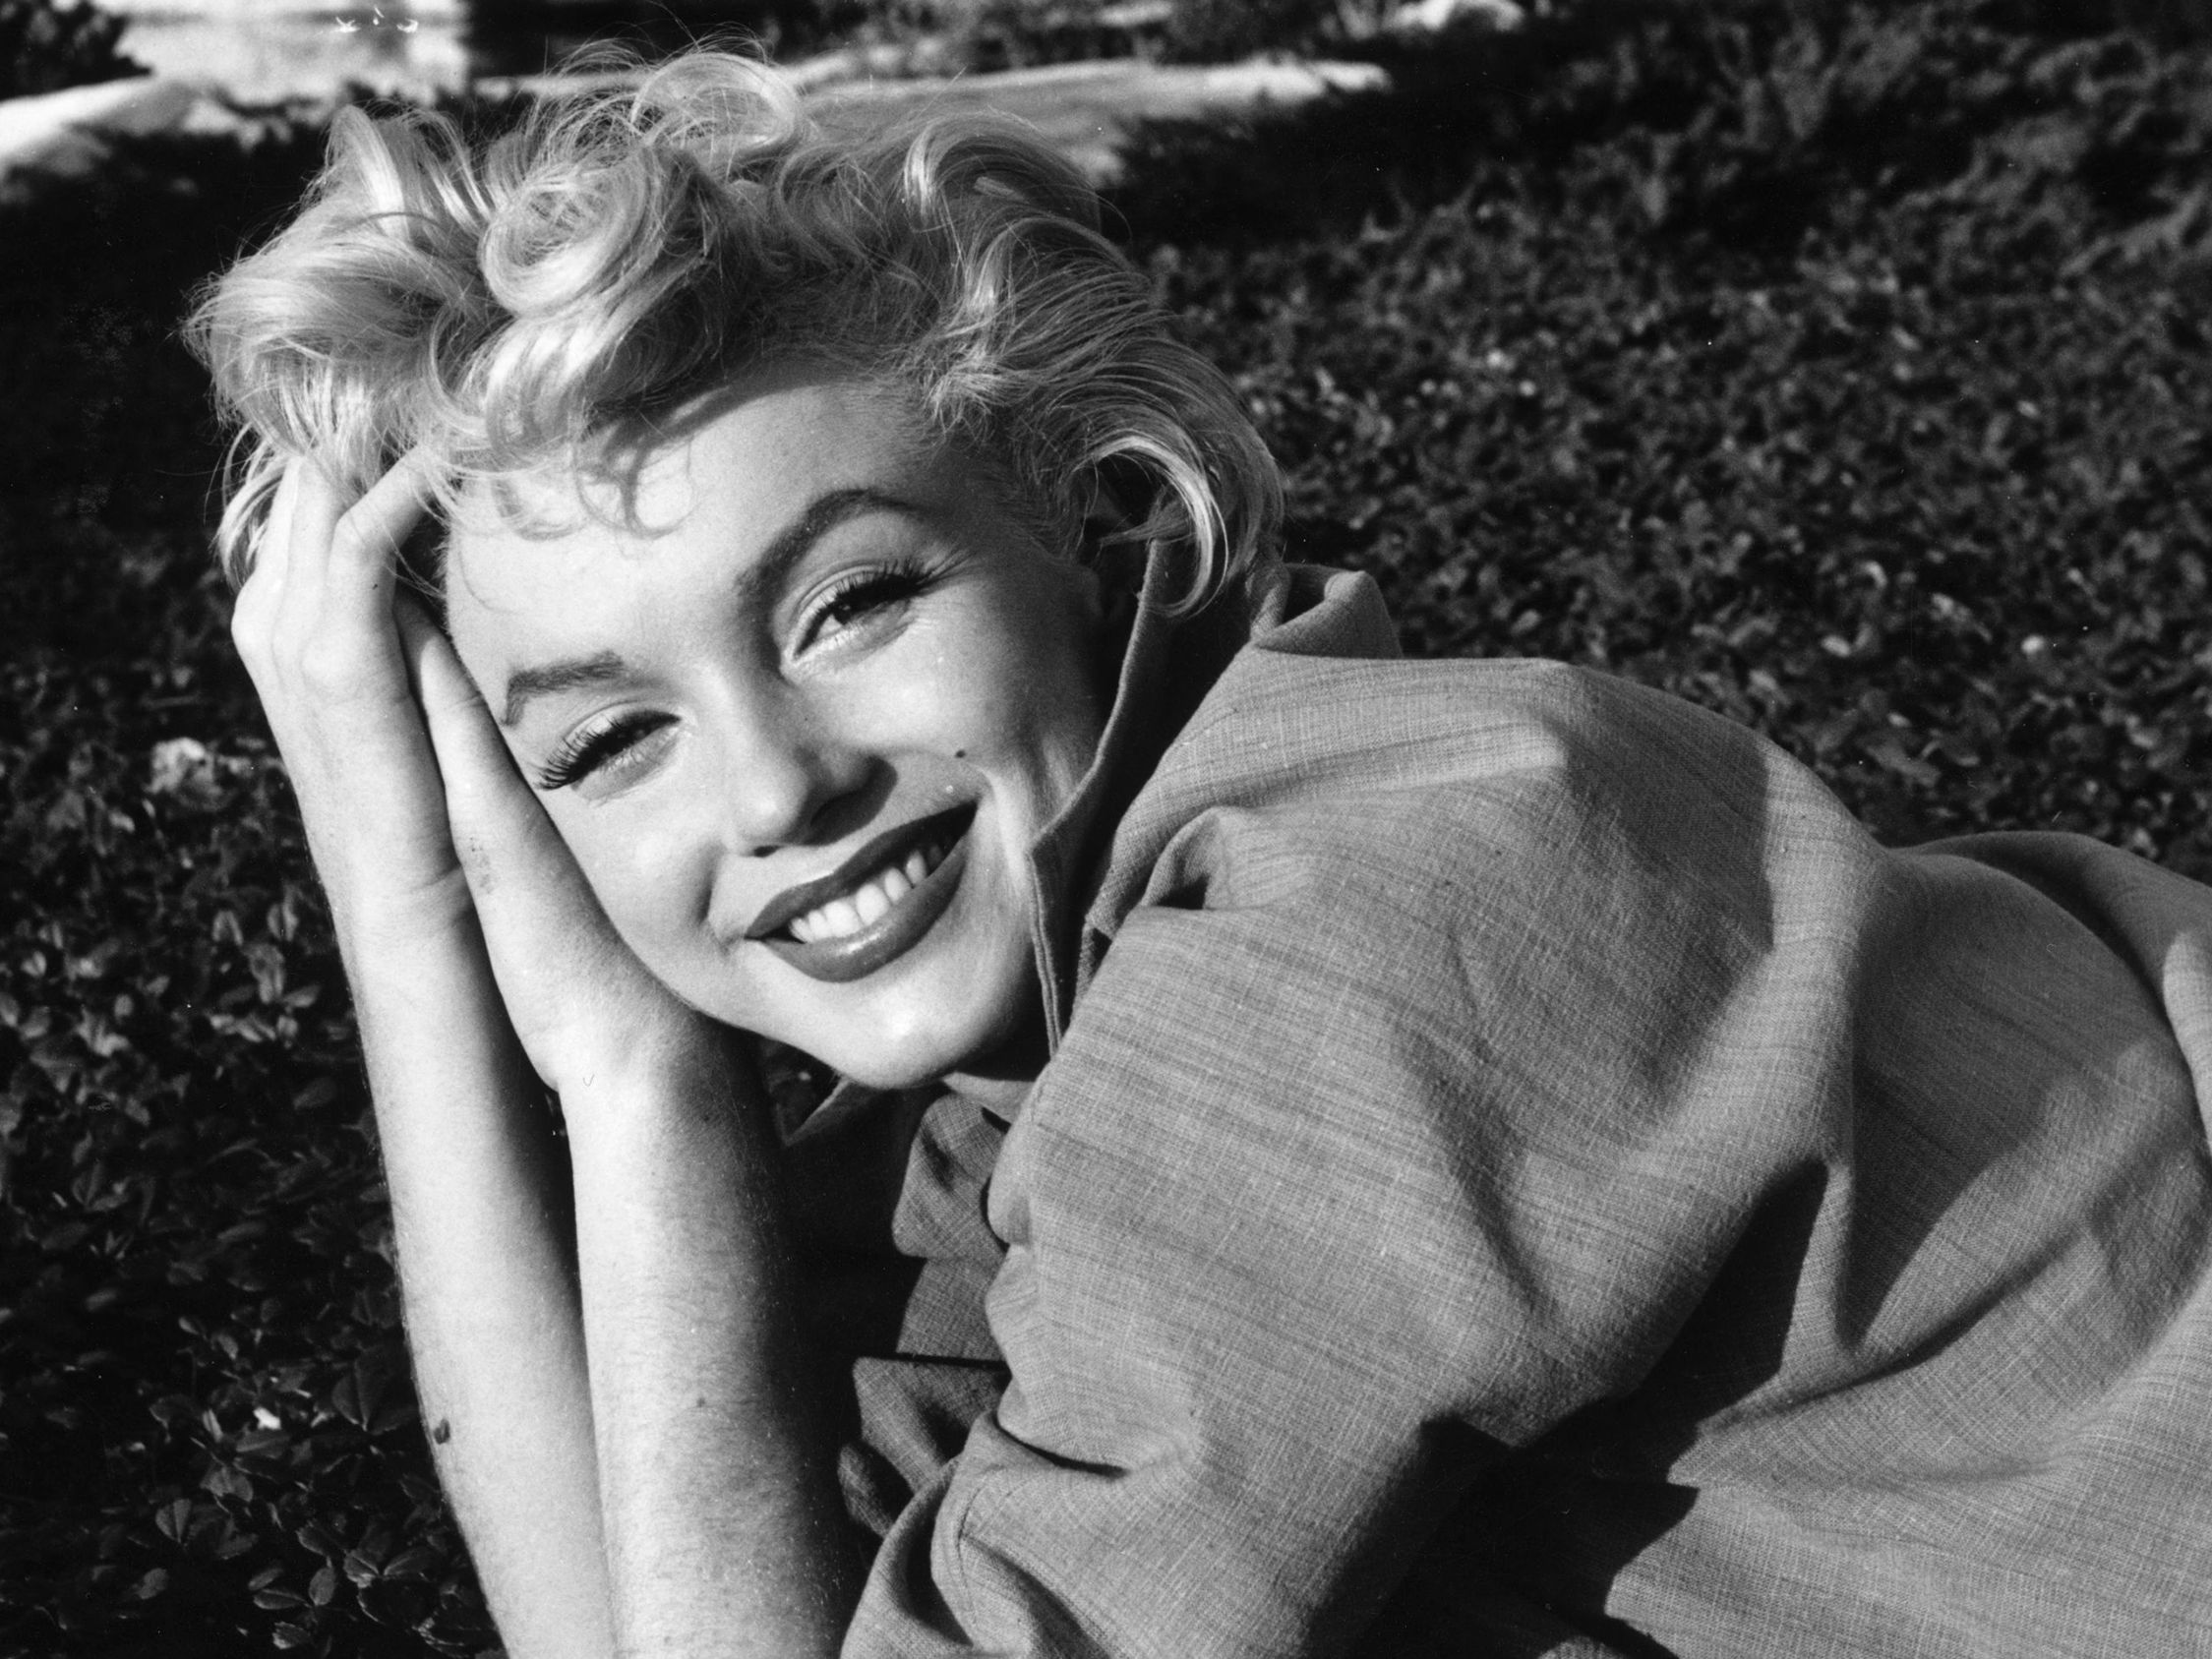 Vintage 60s Film Star Nudes - Marilyn Monroe's life in pictures | CNN